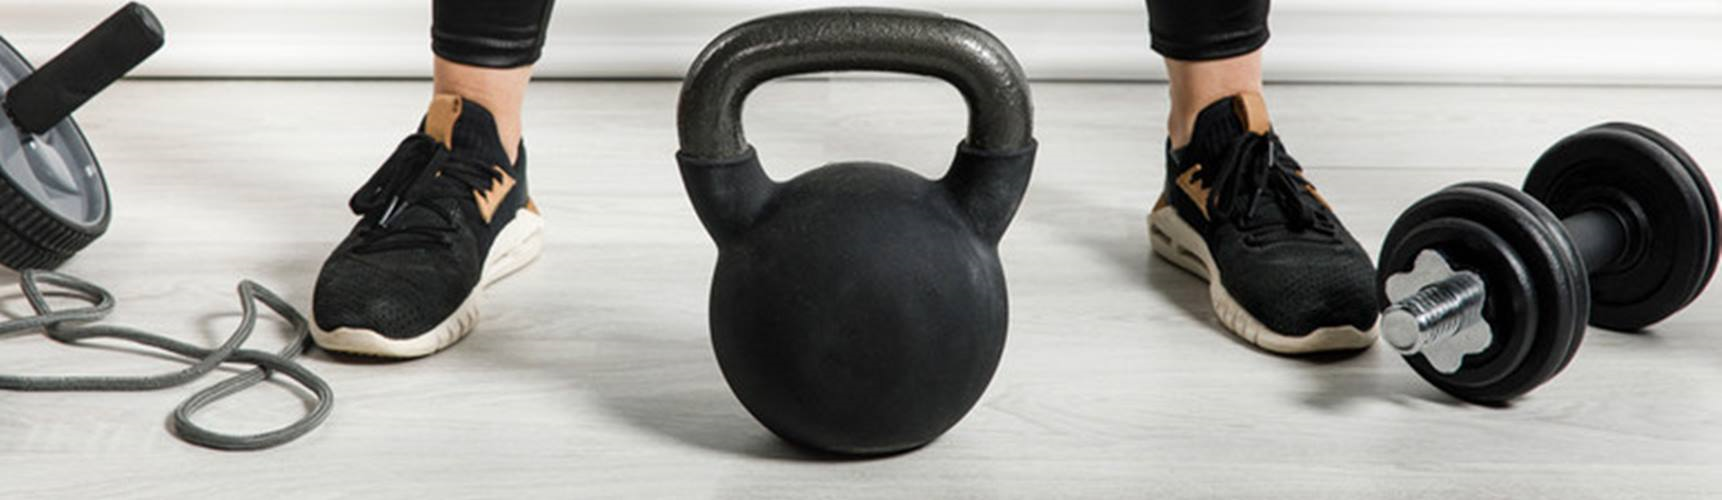 Welcome to the home of kettlebells